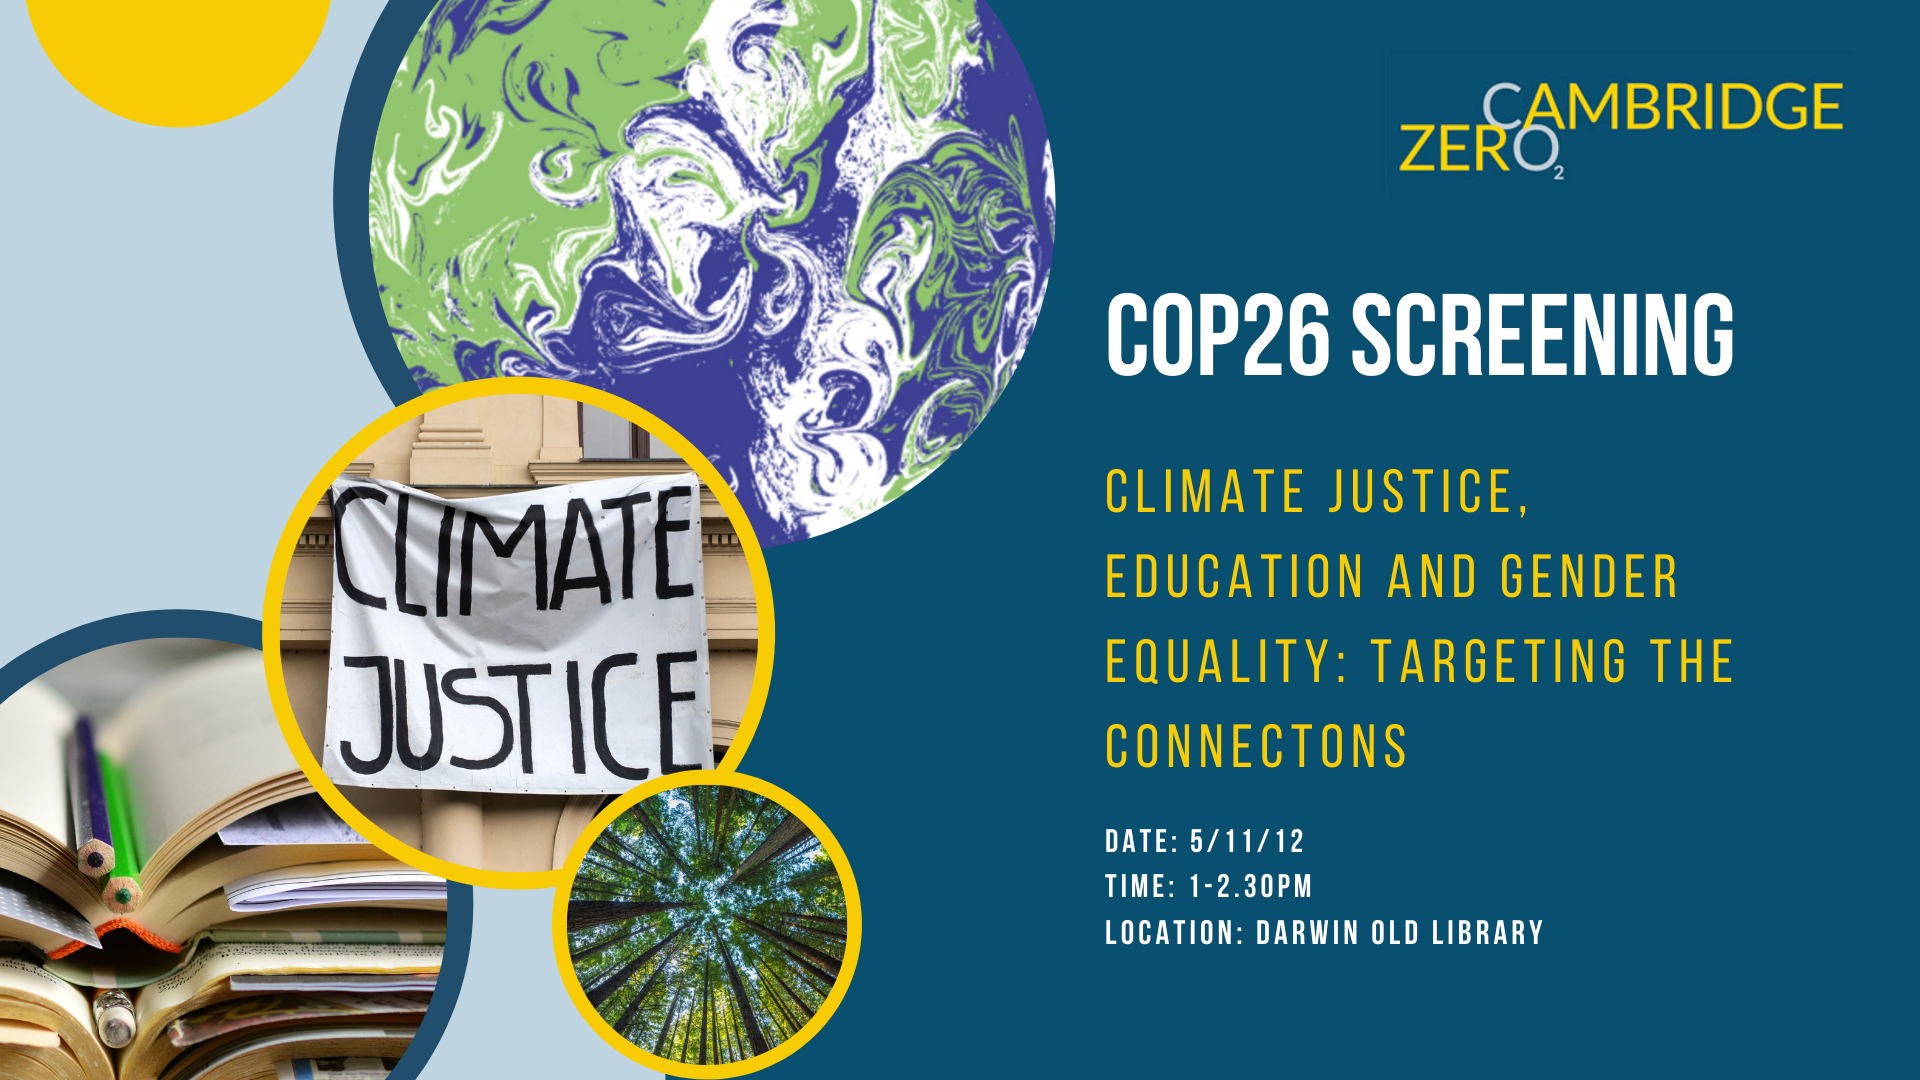 COP26 Screening: Climate Justice, education and gender equality, targeting the connections